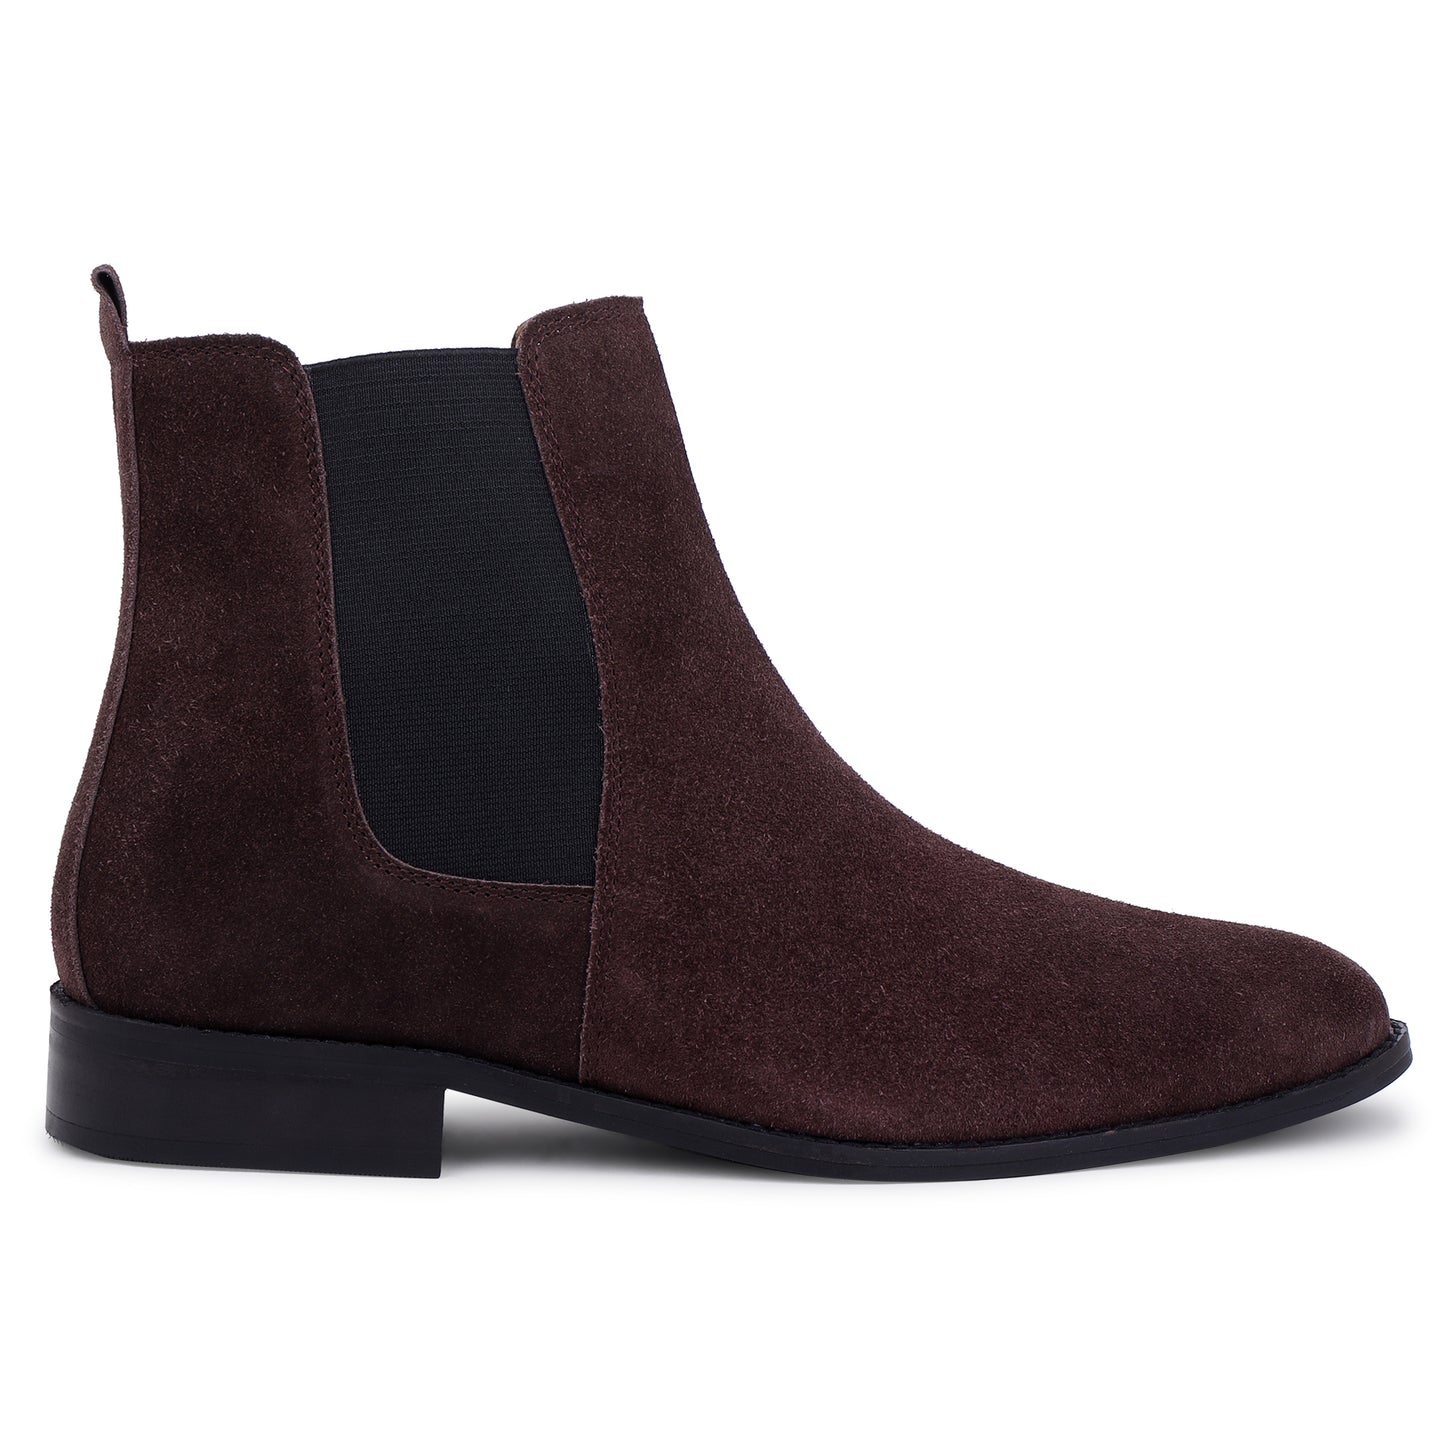 Italian Suede Leather Boots - Brown